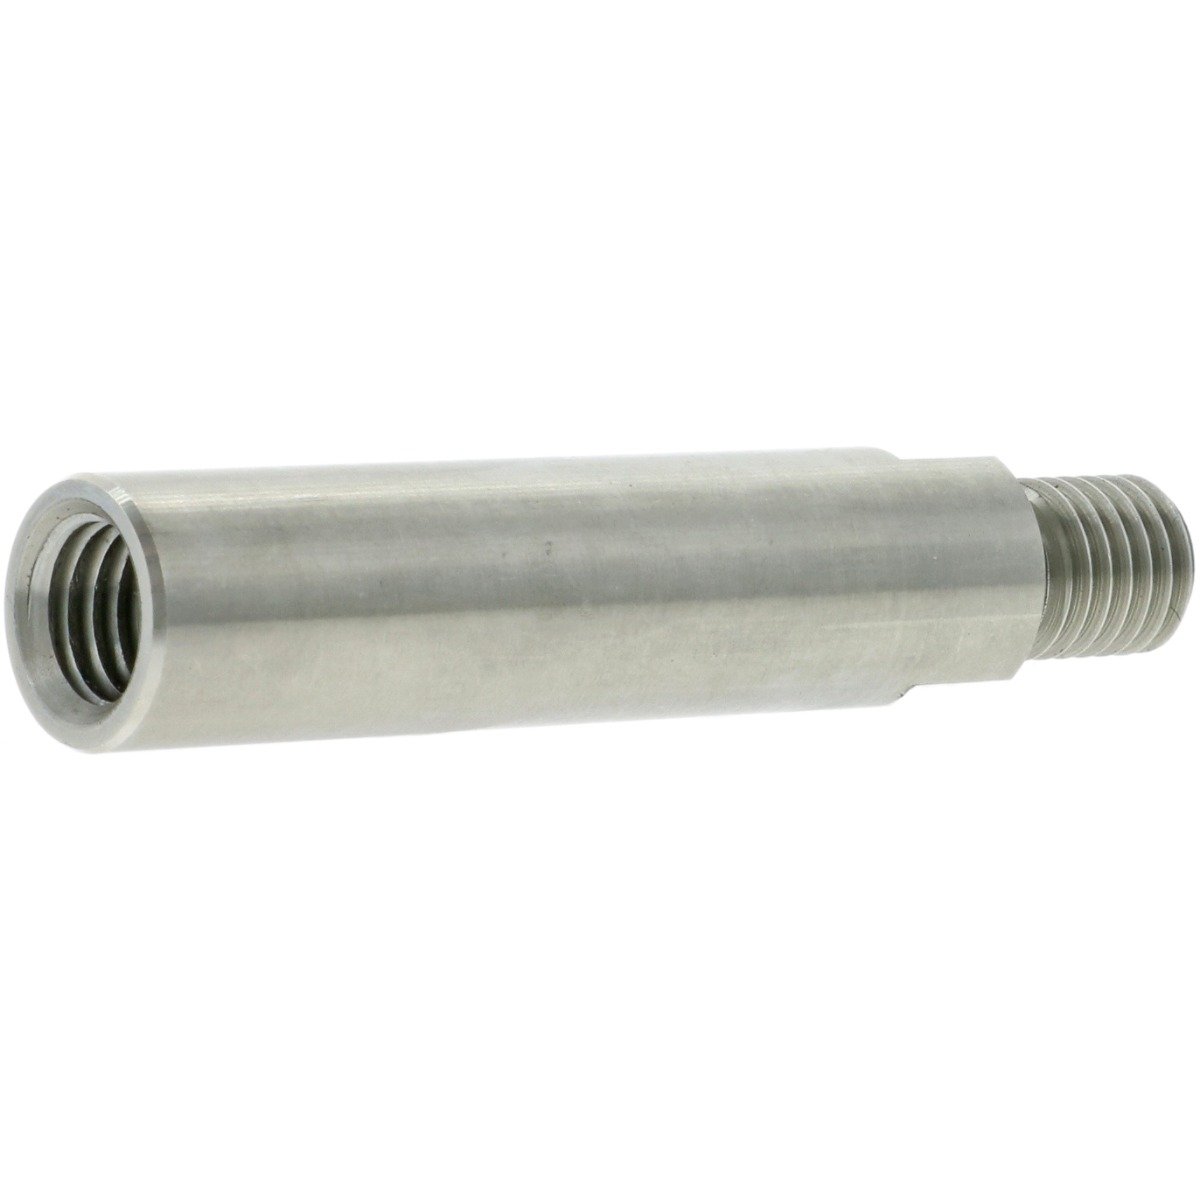 Rotary Extension Bar M14 - 80mm